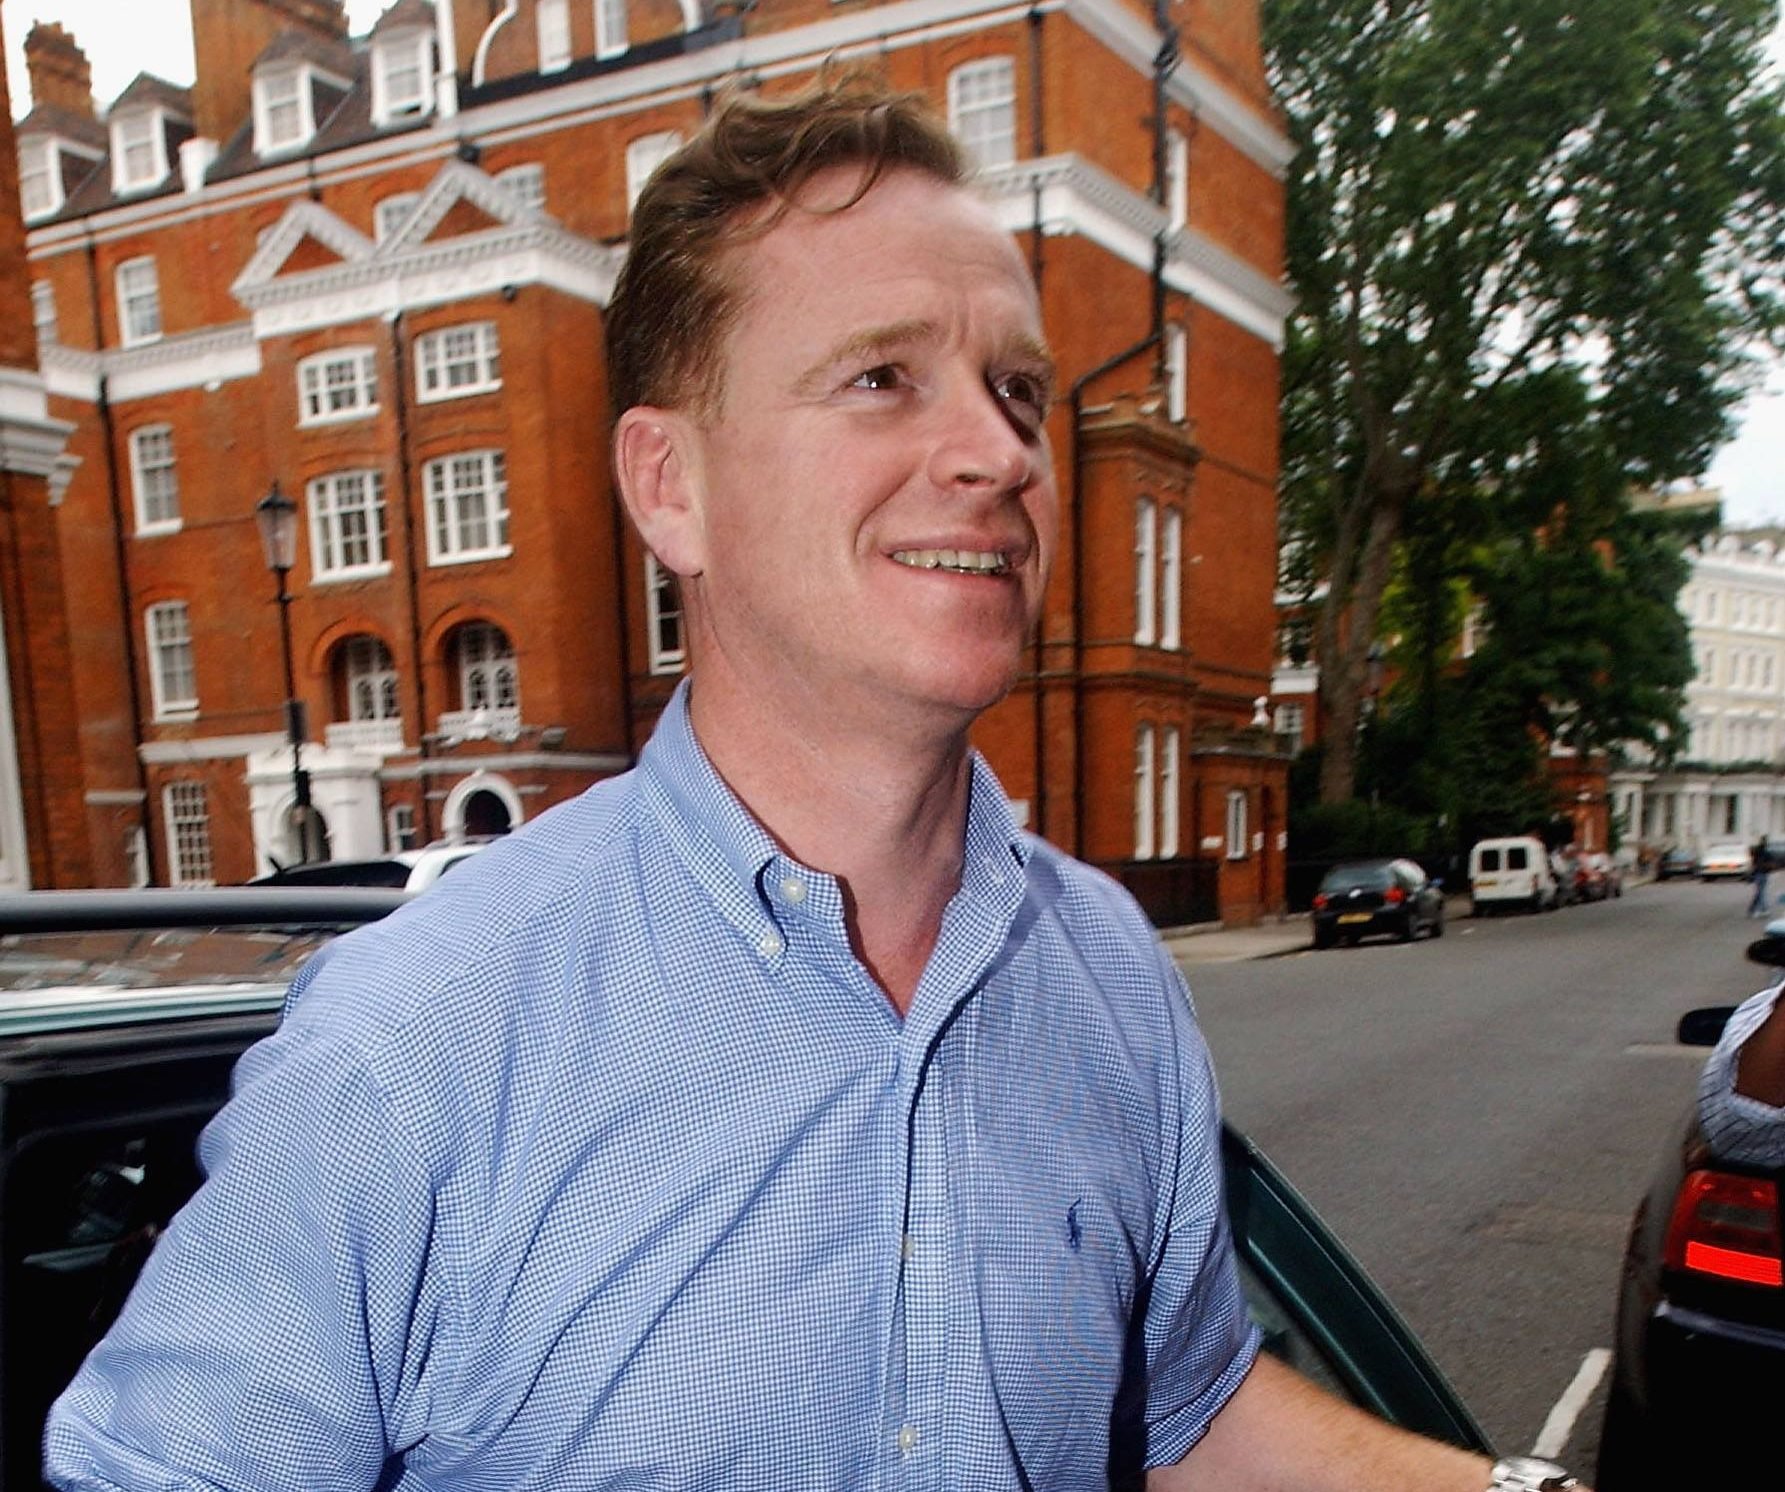 LONDON - JULY 22: Major James Hewitt returns home, following his arrest on drugs charges last night, to his South Kensington residence on July 22, 2004 in London. The Major was detained at the Cactus Bar in Fulham Road along with former Sky News freelance presenter Alison Bell on suspicion of supplying class A drugs. Both were questioned at Notting Hill police station before being bailed until September. (Photo by Steve Finn/Getty Images)